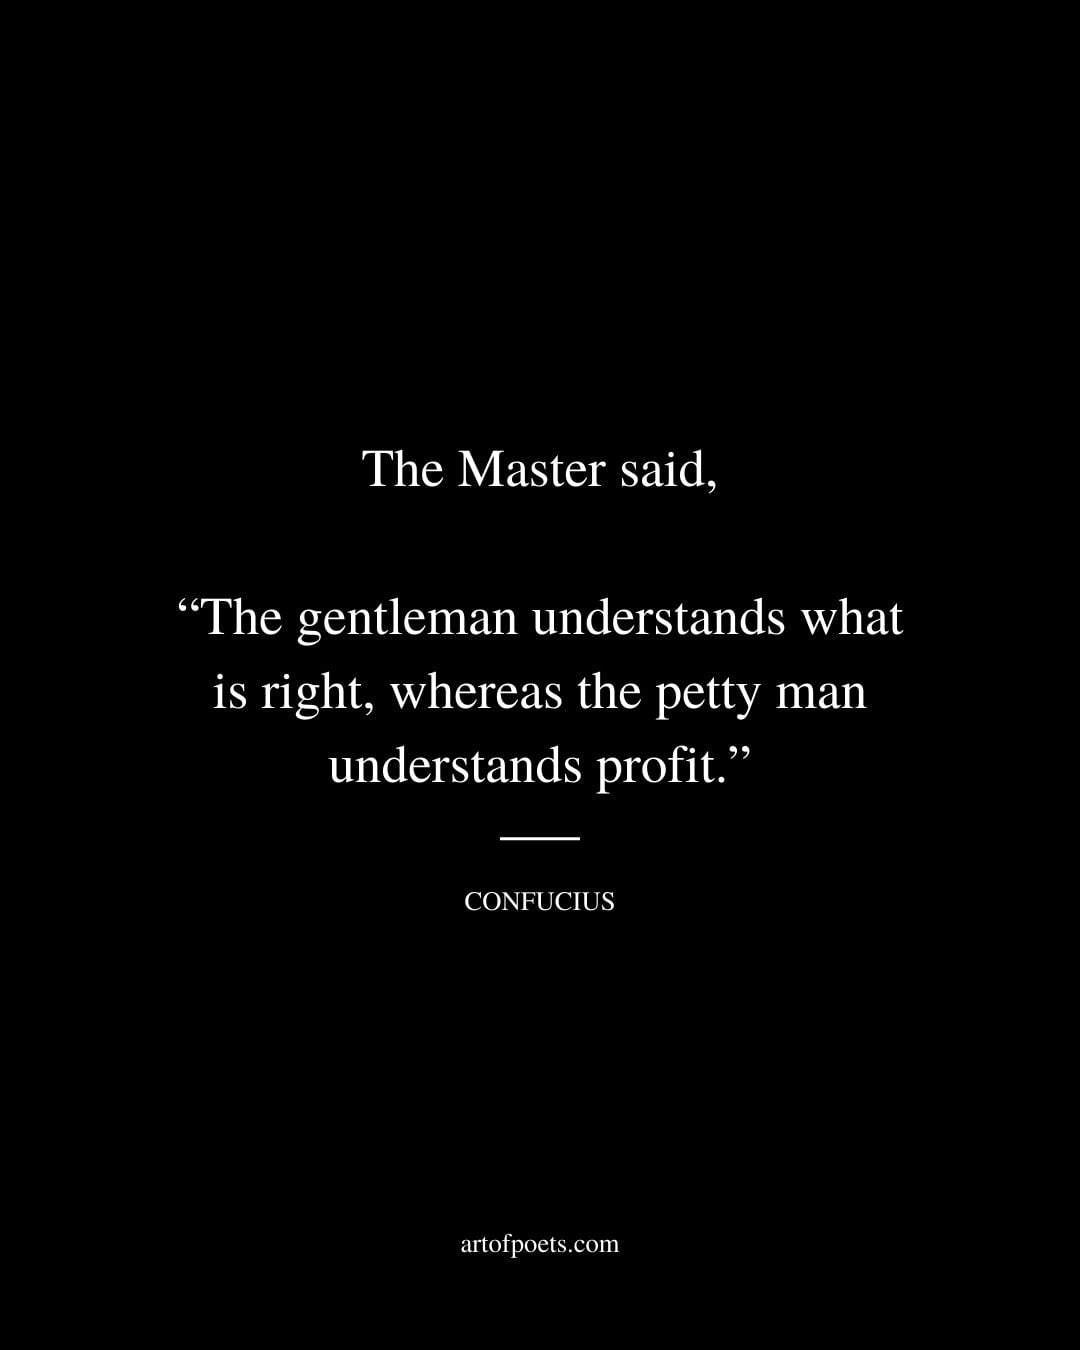 The Master said The gentleman understands what is right whereas the petty man understands profit